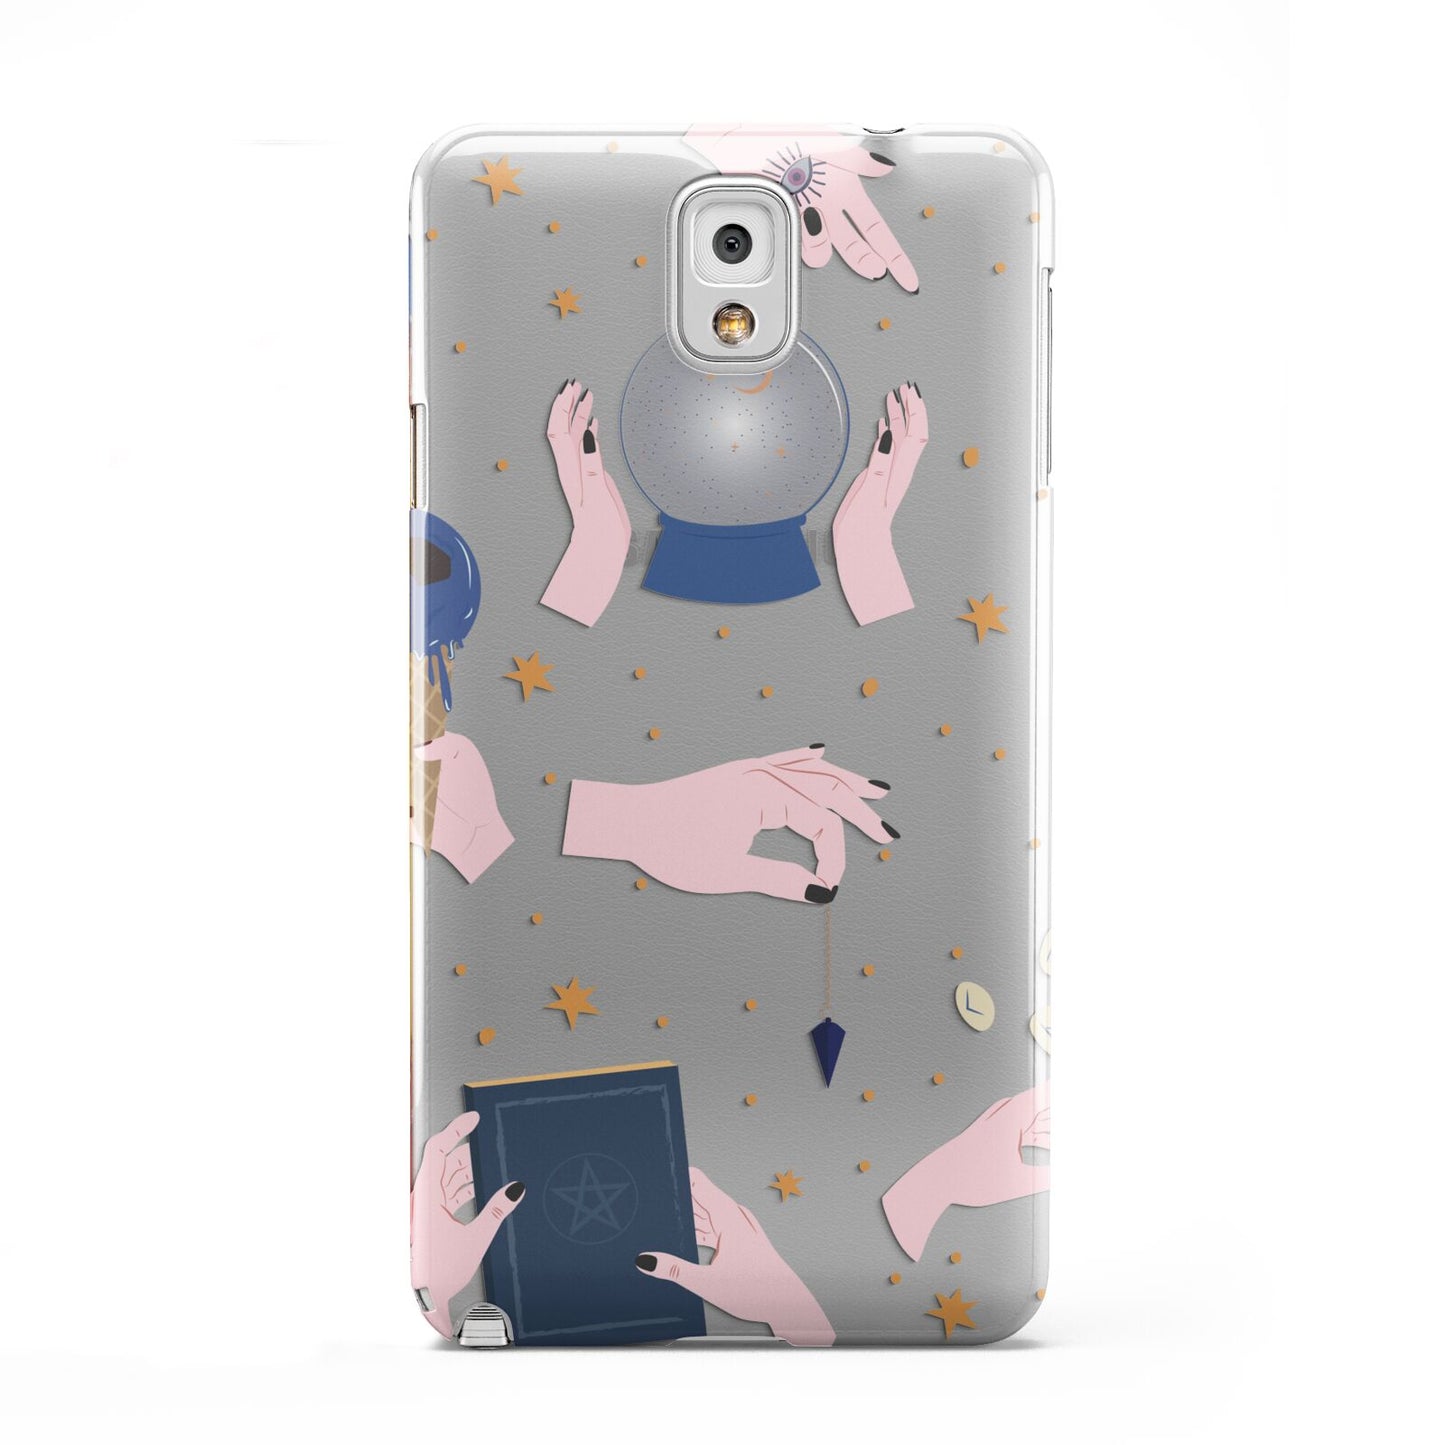 Clairvoyant Witches Hands Samsung Galaxy Note 3 Case